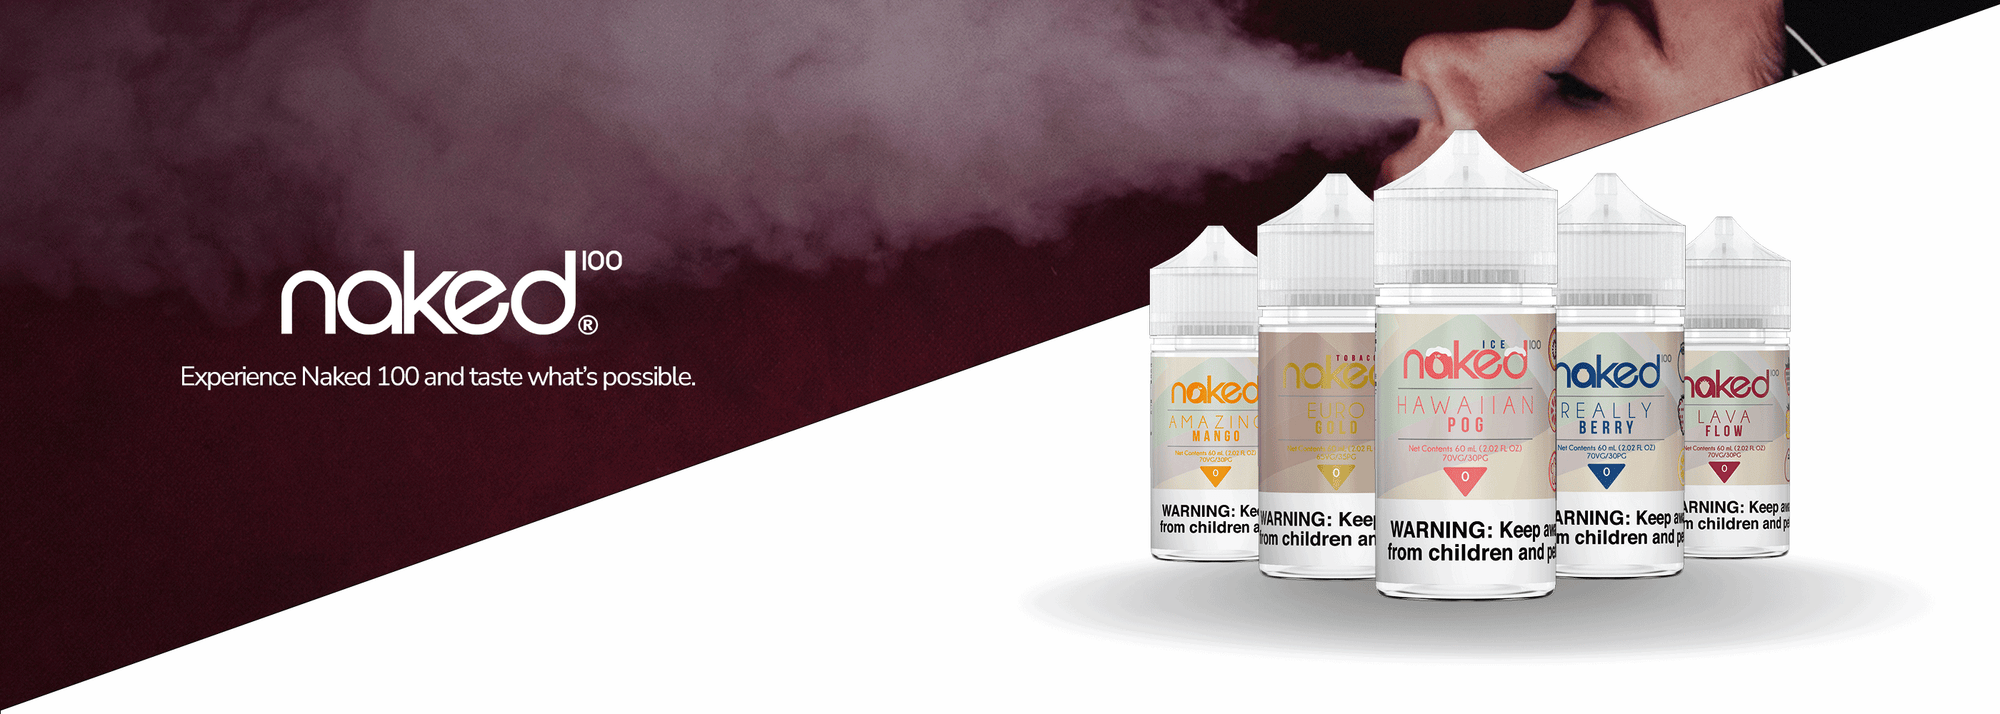 Buy Naked 100 Vape Liquid - Wick and Wire Co Melbourne Vape Shop, Victoria